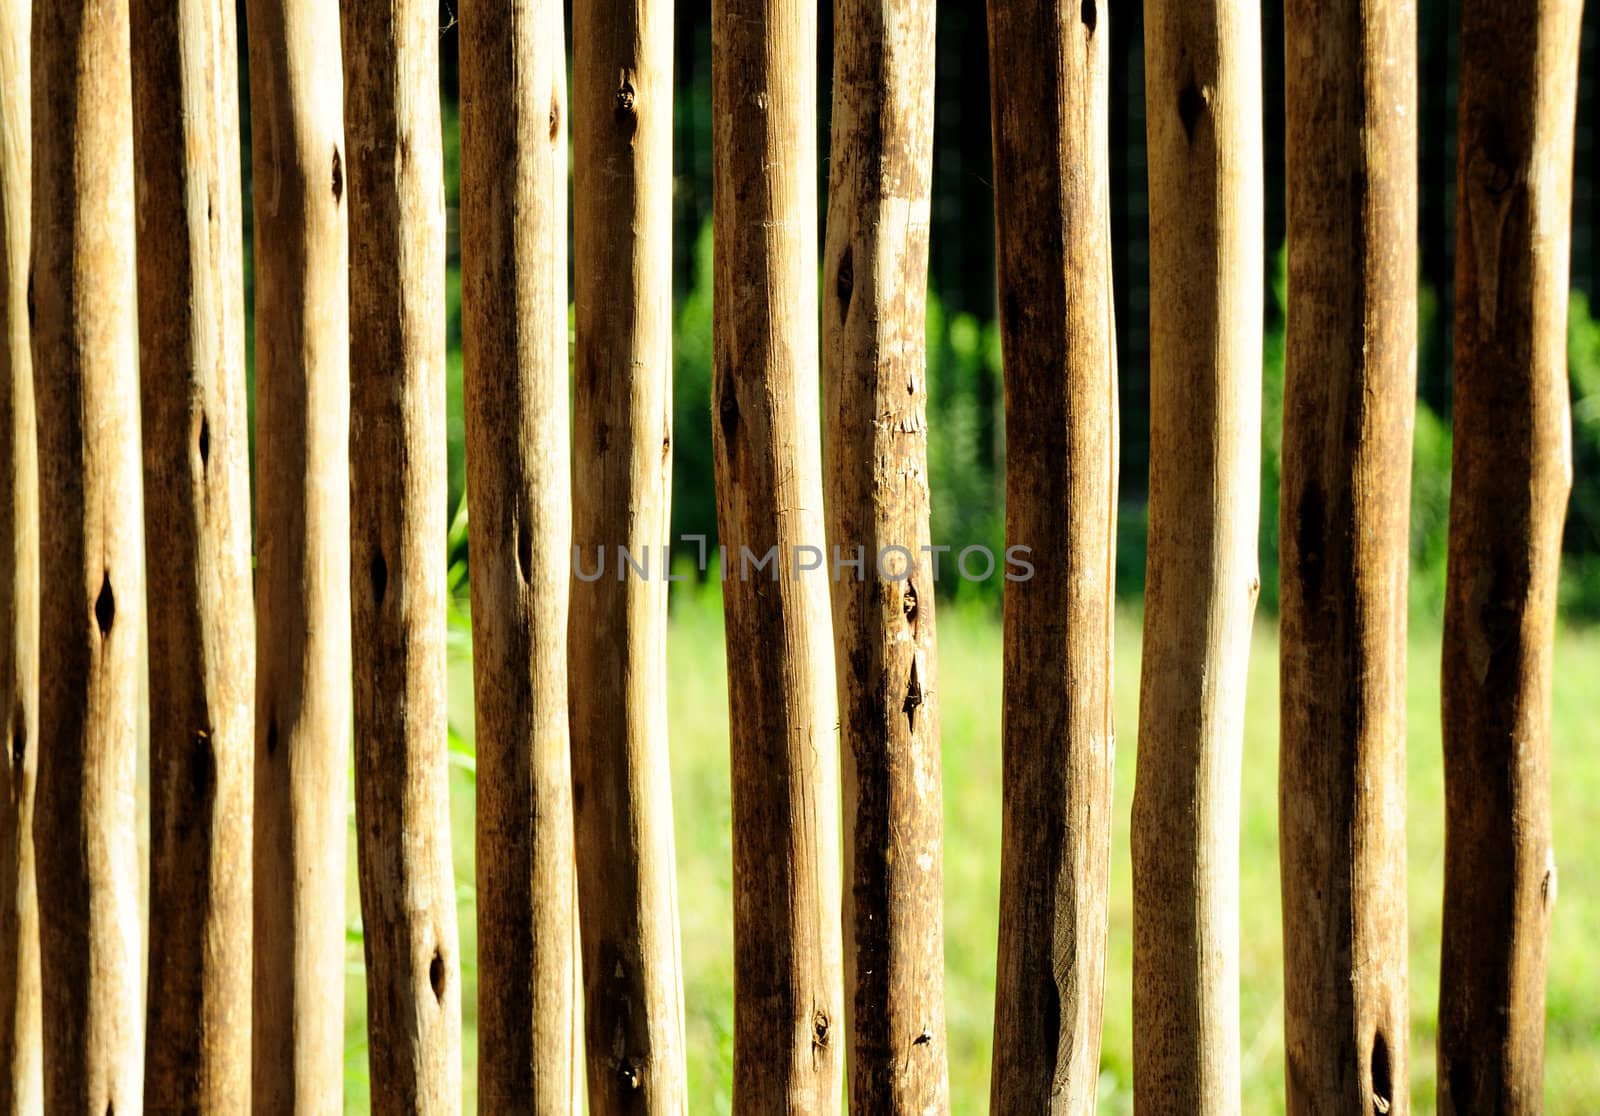 Fence by PDImages